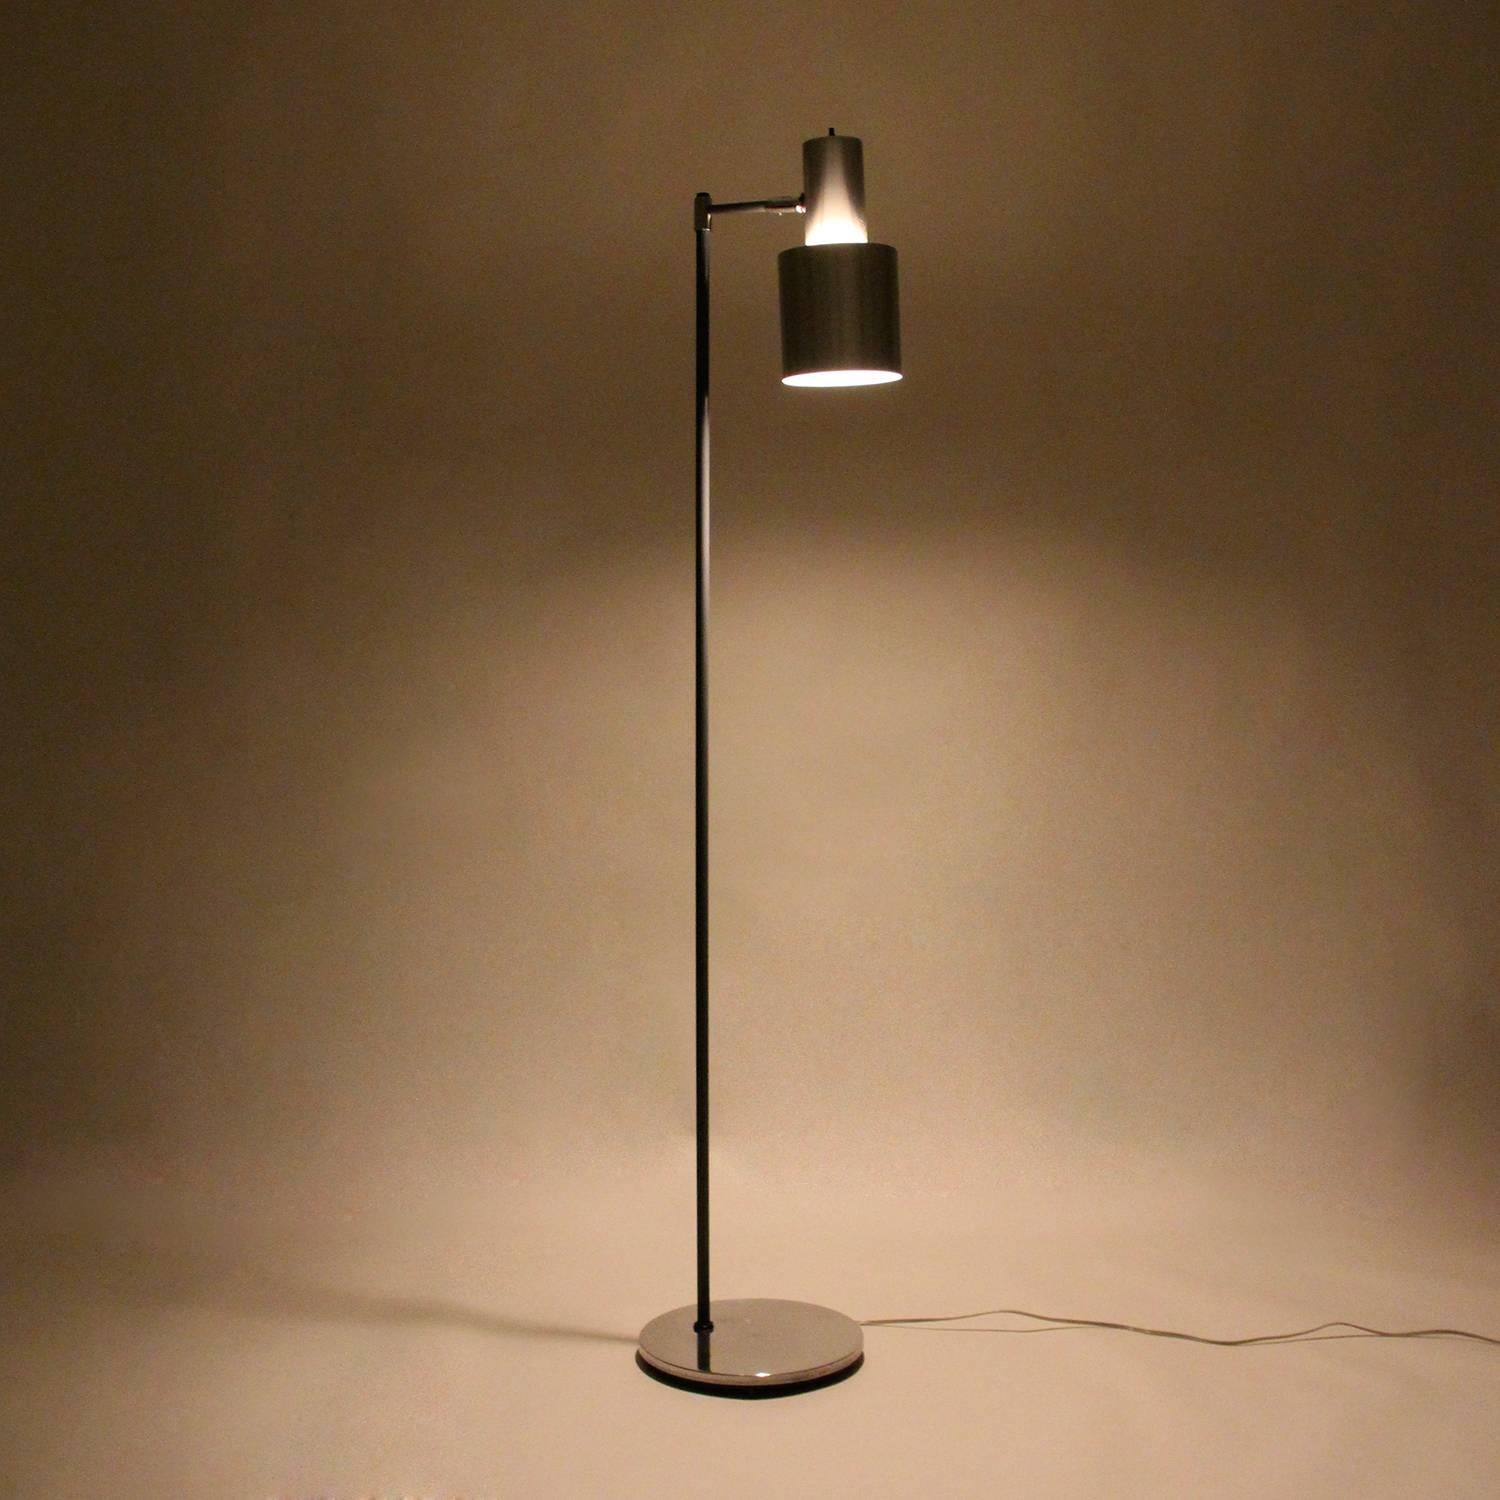 Stylish midcentury floor lamp - the Studio is designed by Jo Hammerborg for Fog & Mørup in 1963 - in very good vintage condition.

The Studio floor lamp is made of a circular aluminum base, from where a gray lacquered metal arm rise straight